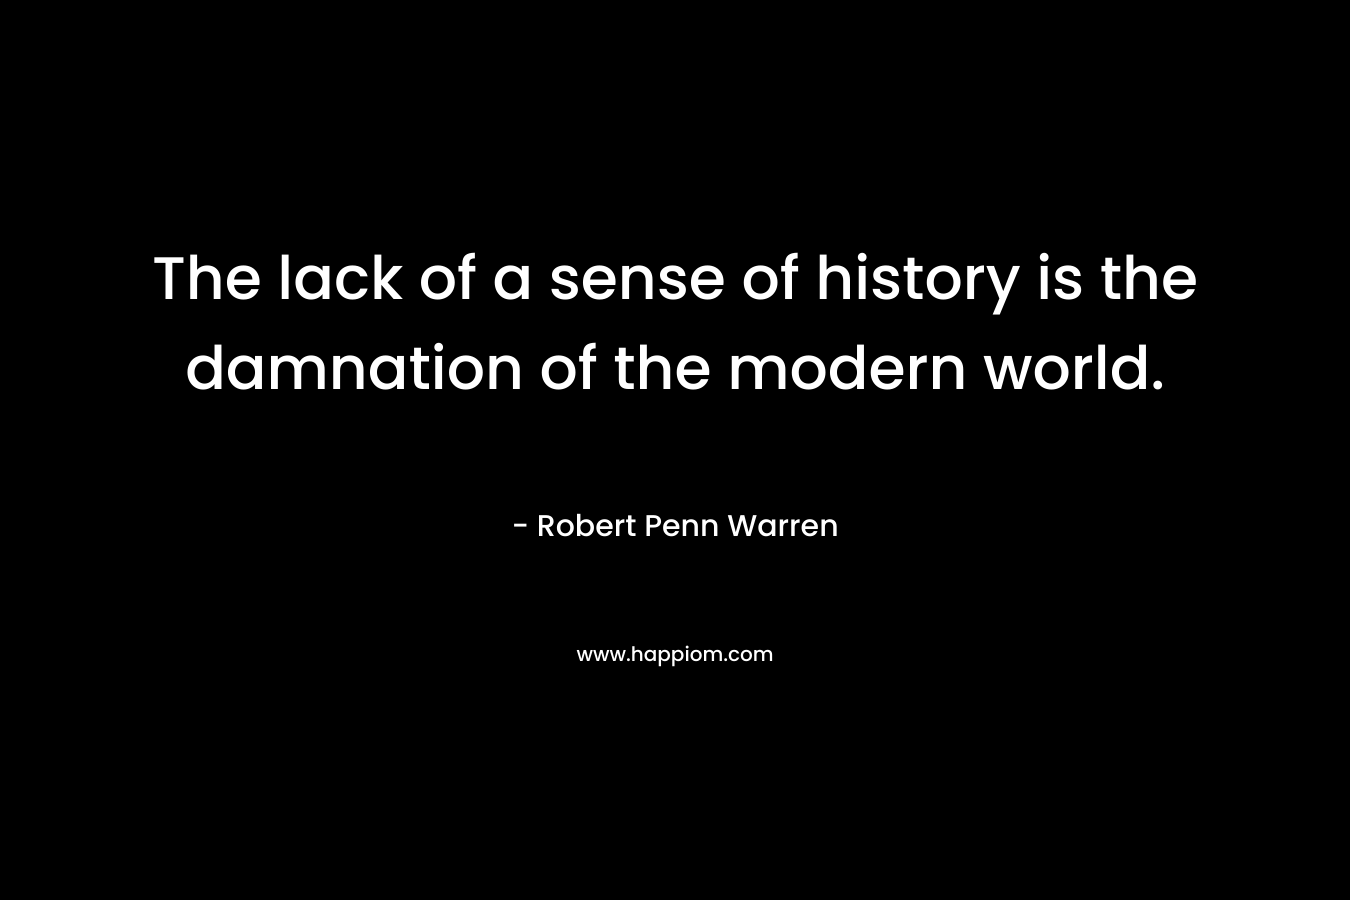 The lack of a sense of history is the damnation of the modern world.